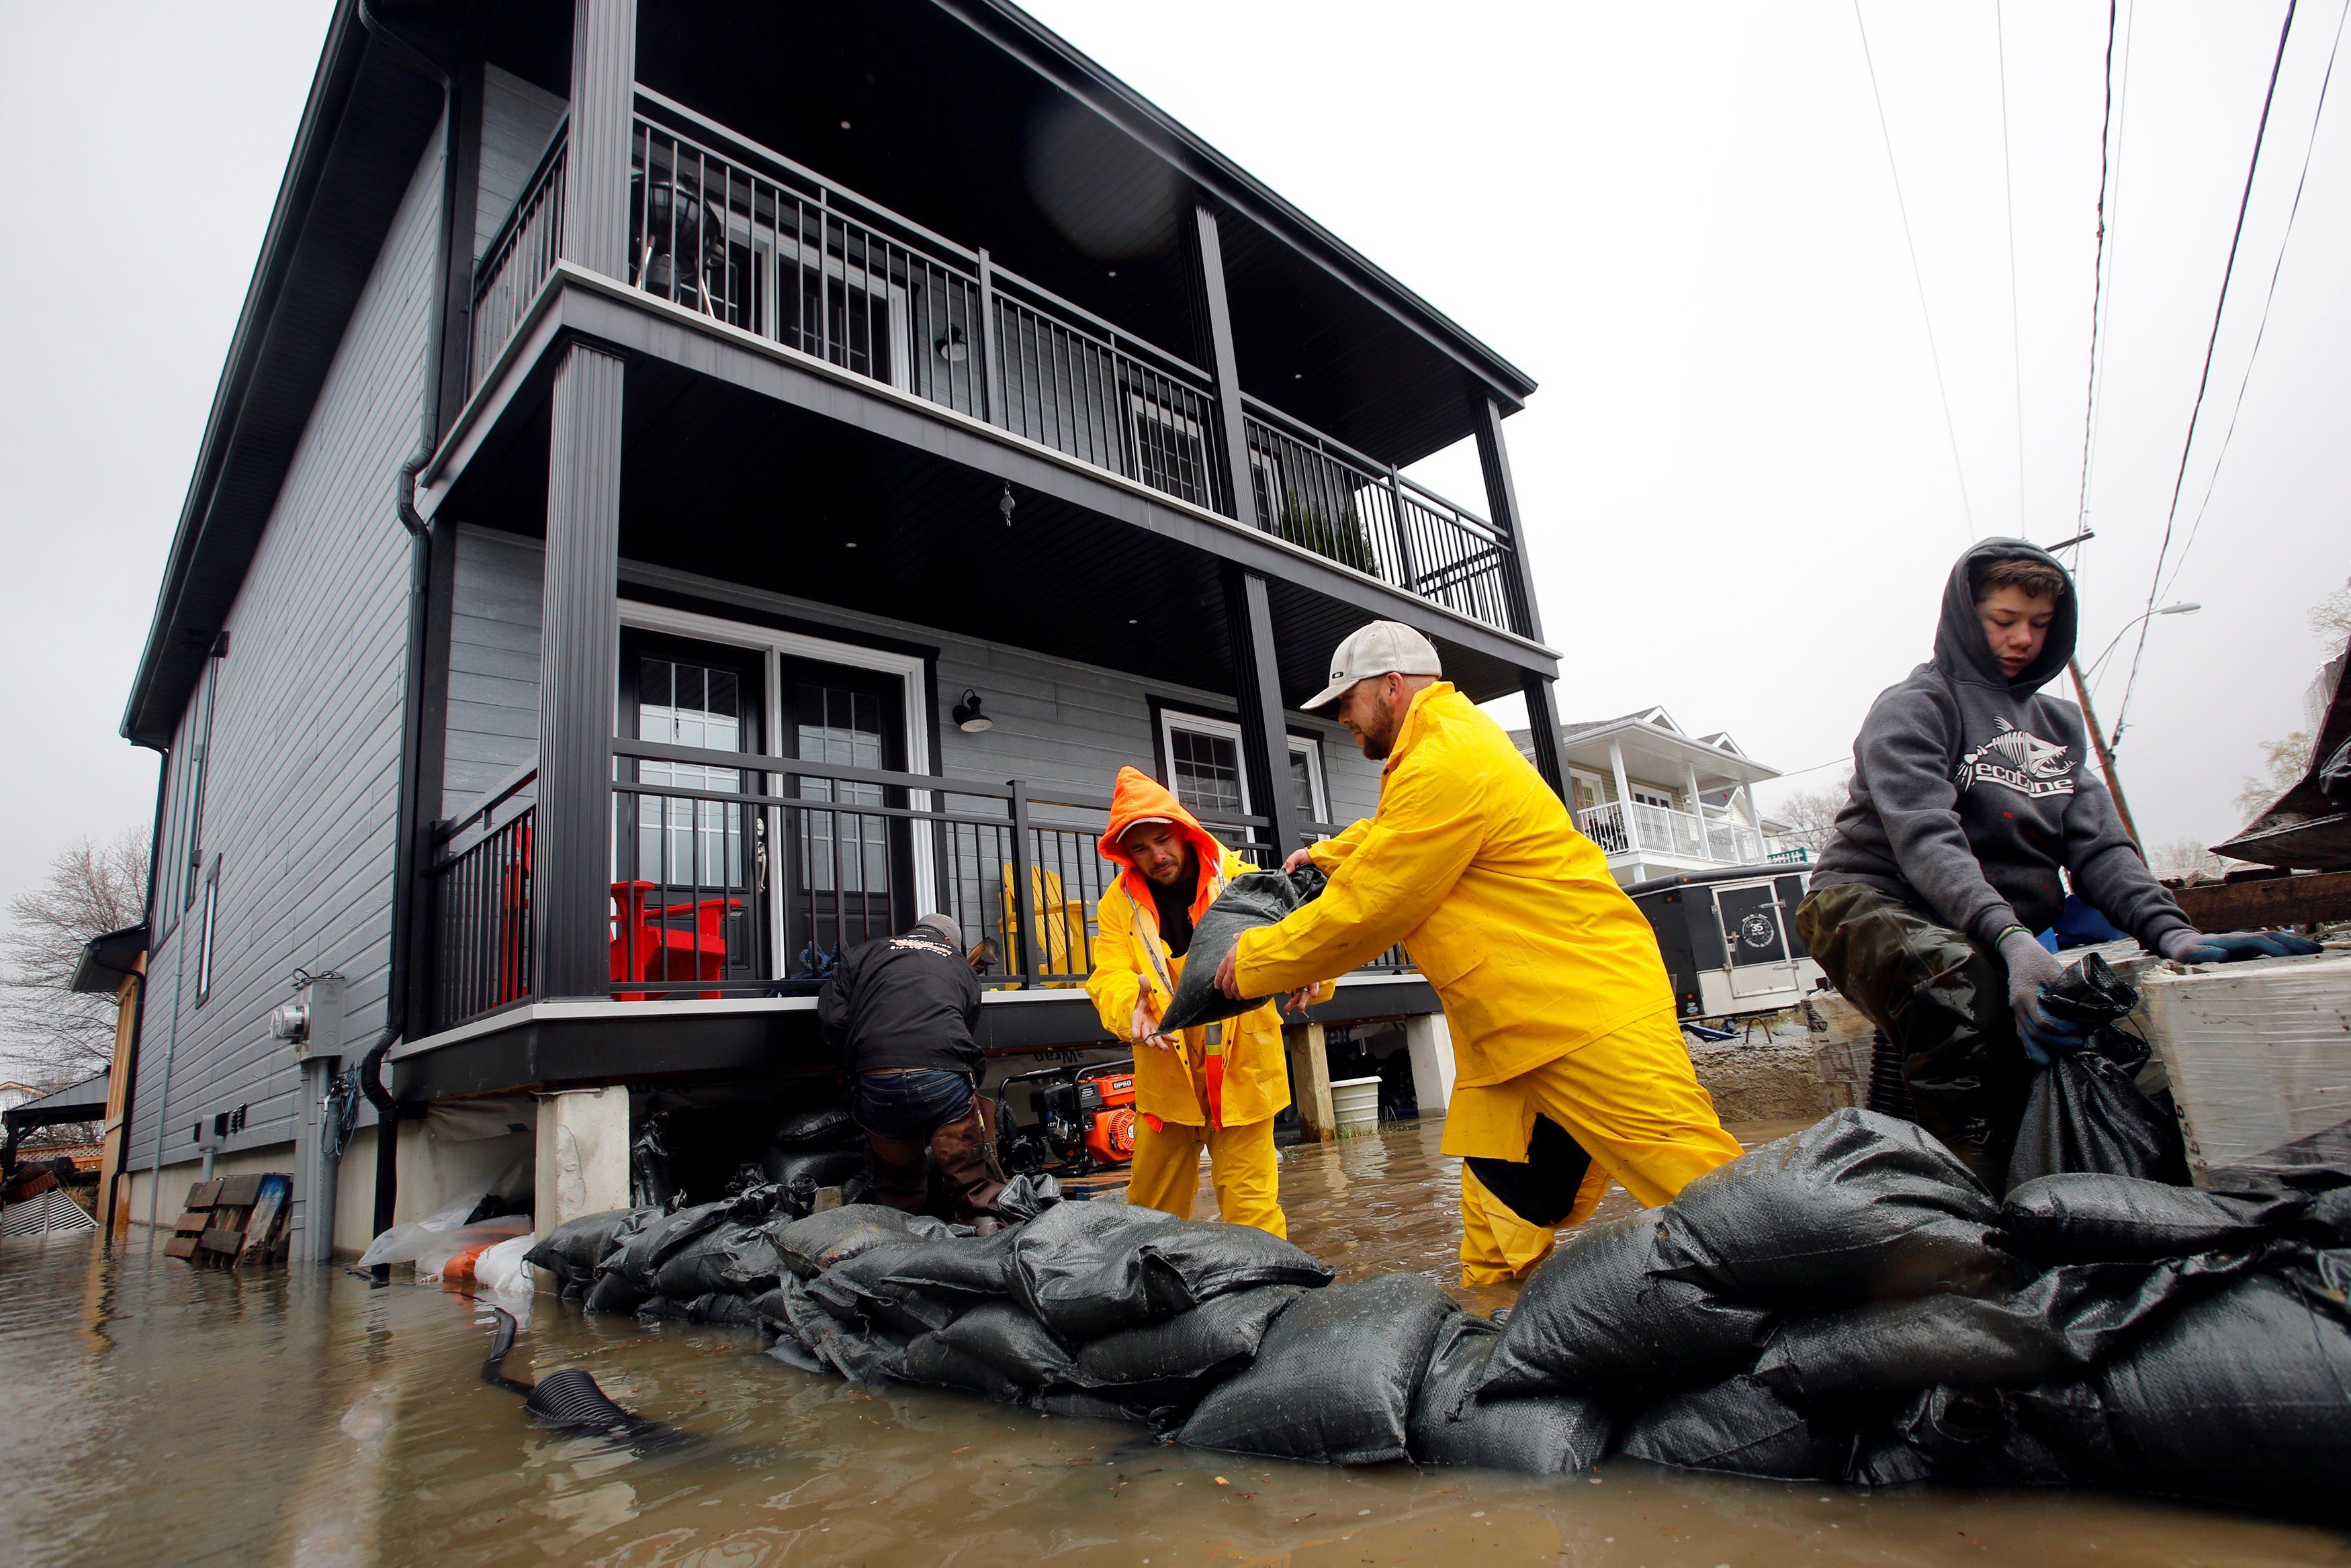 Residents place sandbags outside a home in a flooded residential area in Gatineau